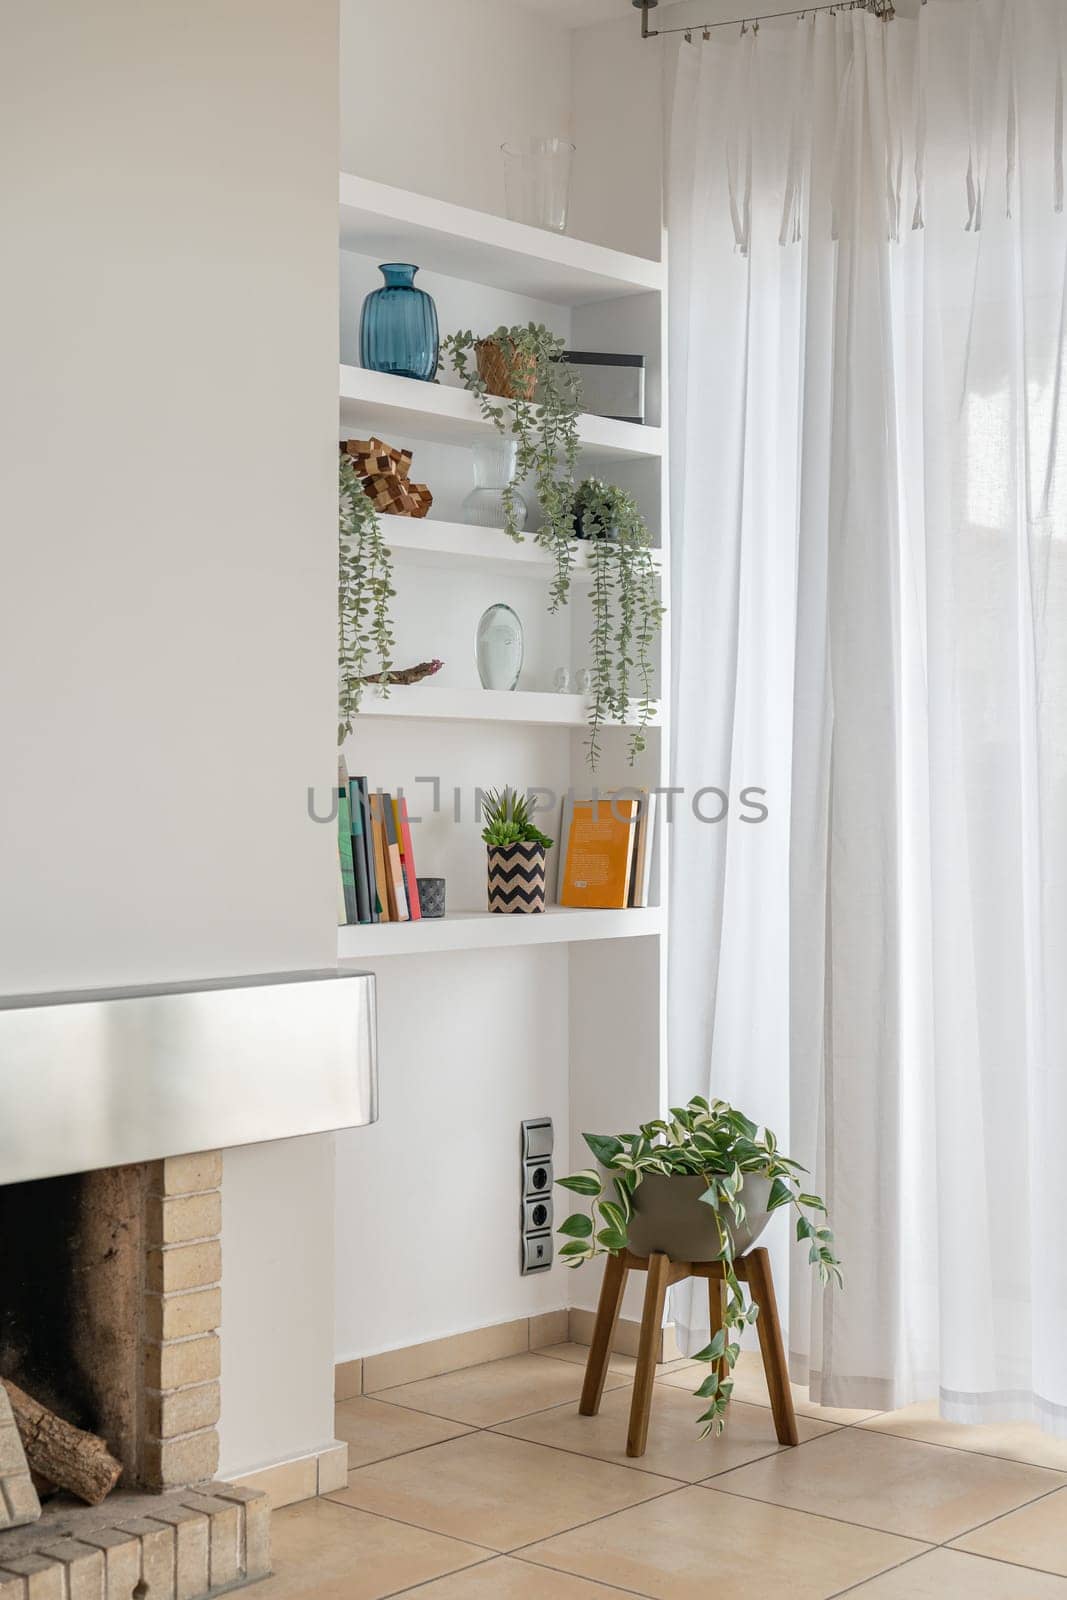 Shelving unit with pot plants and decorative details in living room. Bookshelves by window curtain in renovated apartment. Interior design